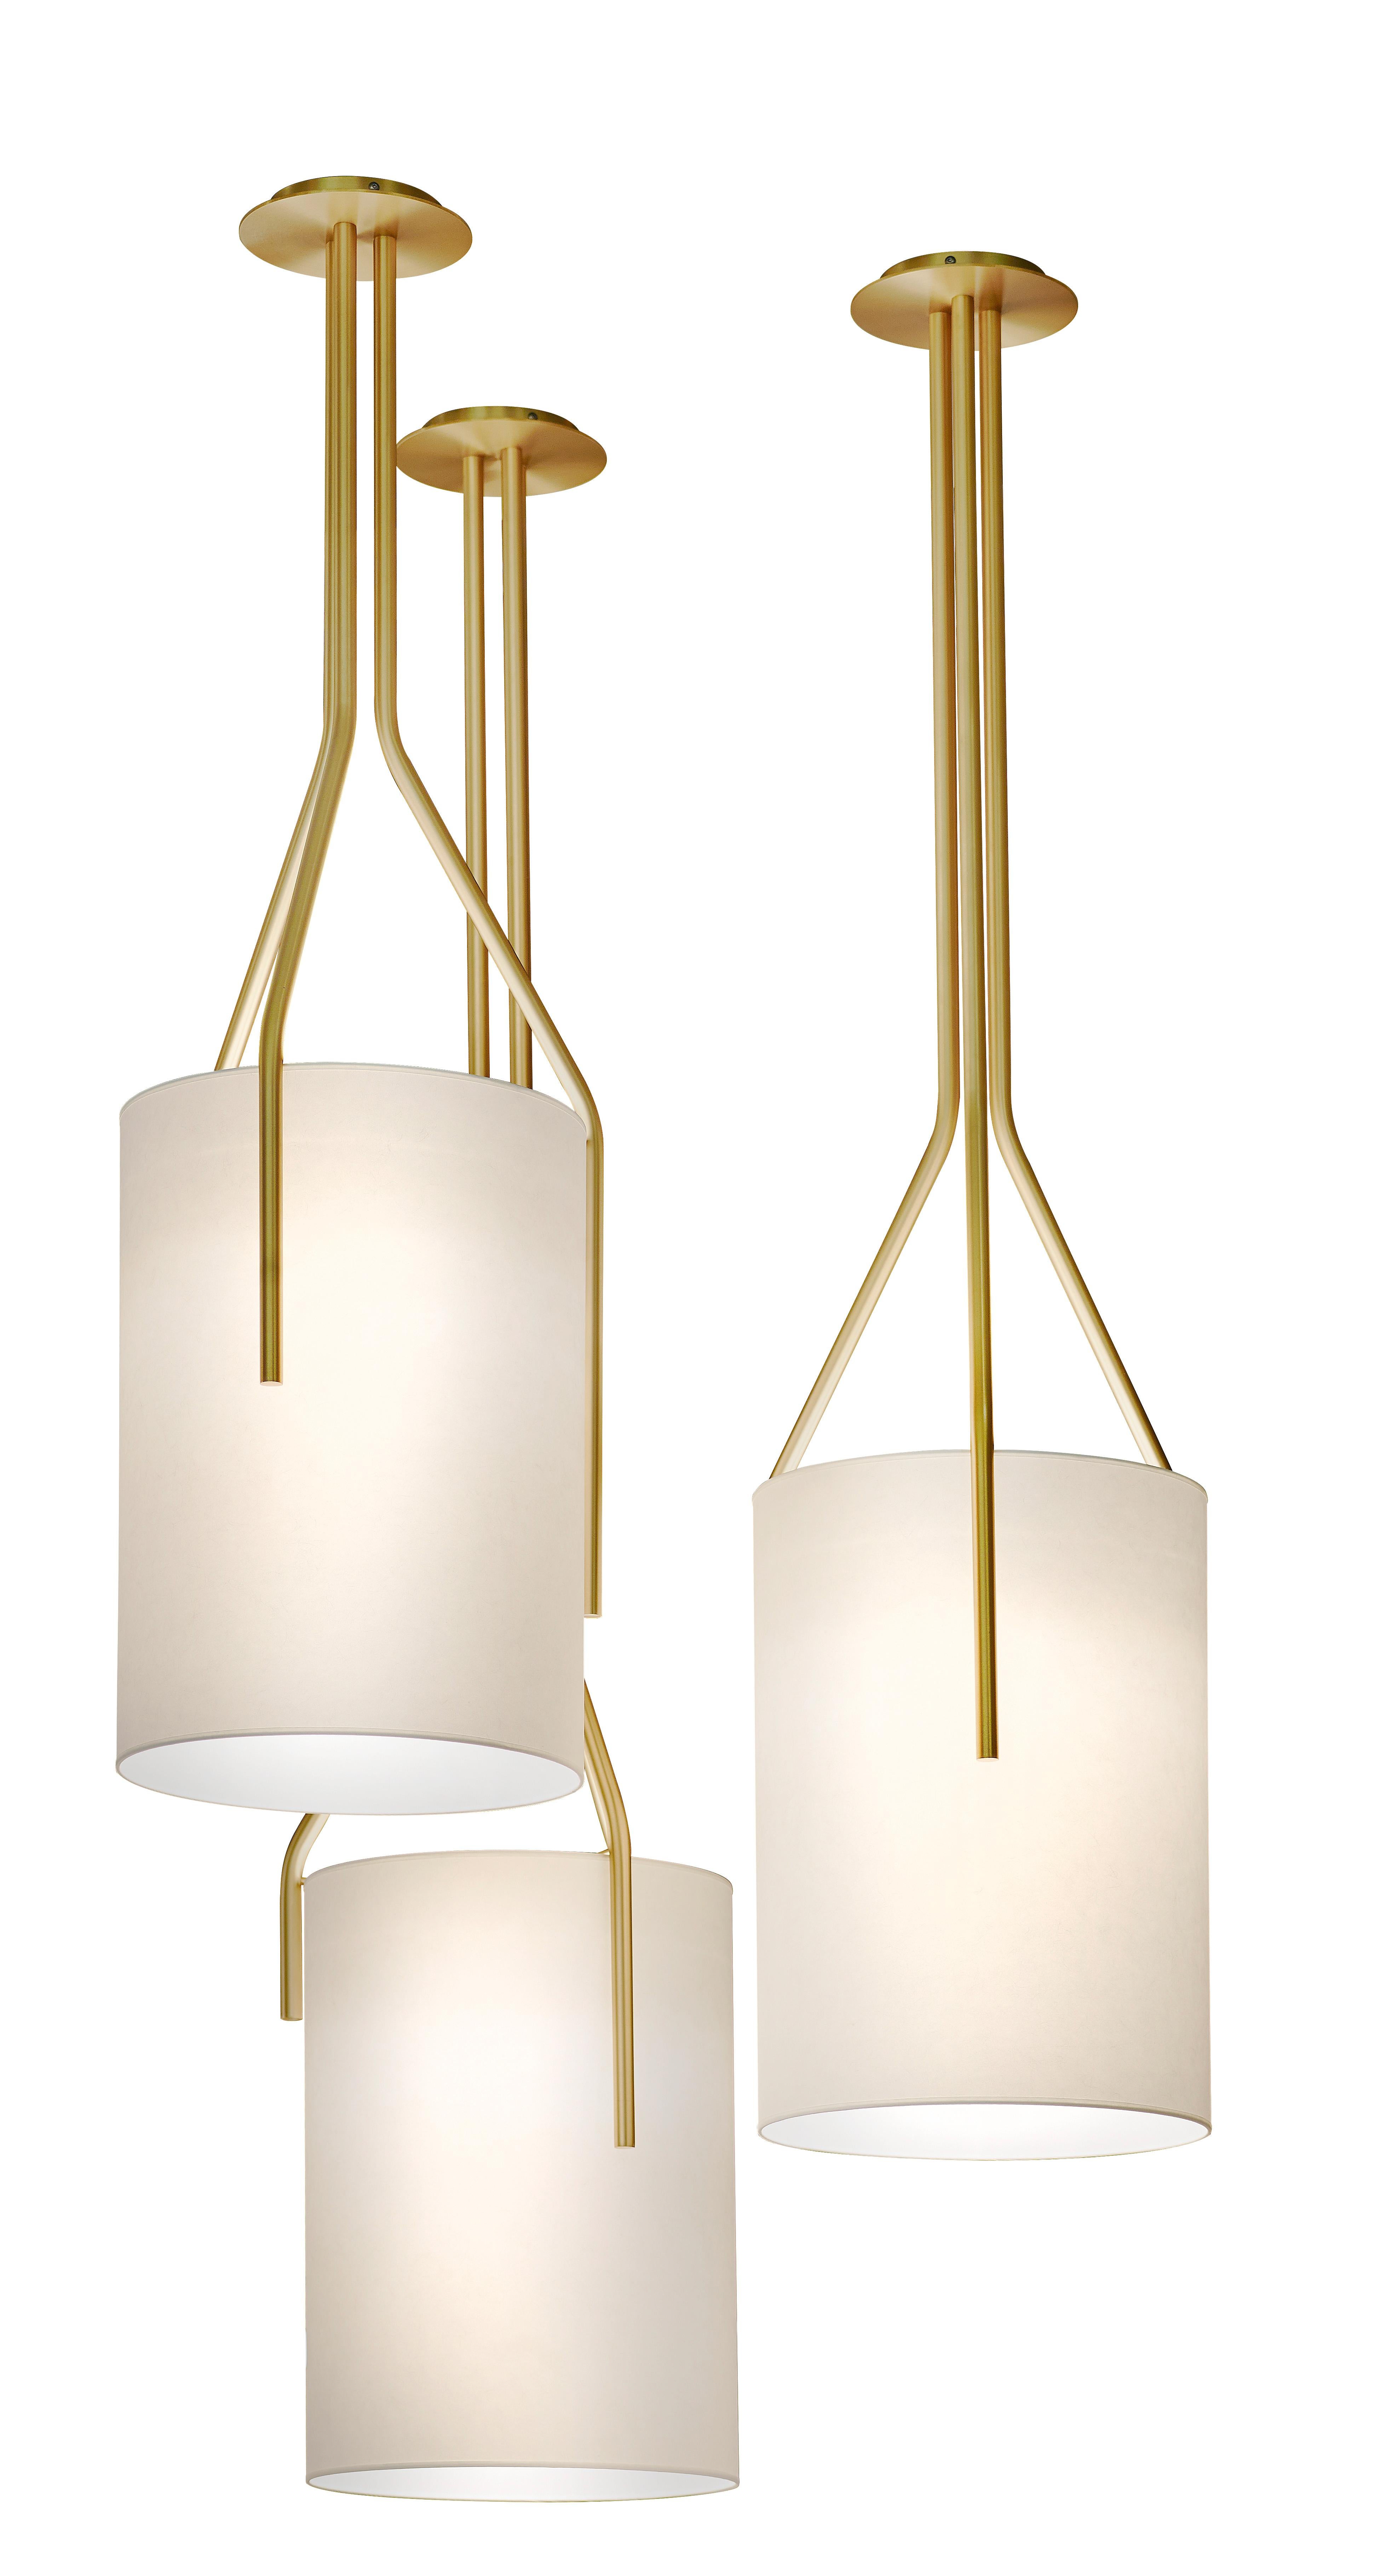 Set of 3 Arborescence pendants by Hervé Langlais
Dimensions: D 33 X H 100, D 33 x H 125, D 33 x H 150cm
Materials: solid brass, lampshade drop paper® M1, black textile cable (2m).
Others finishes and dimensions are available.

All our lamps can